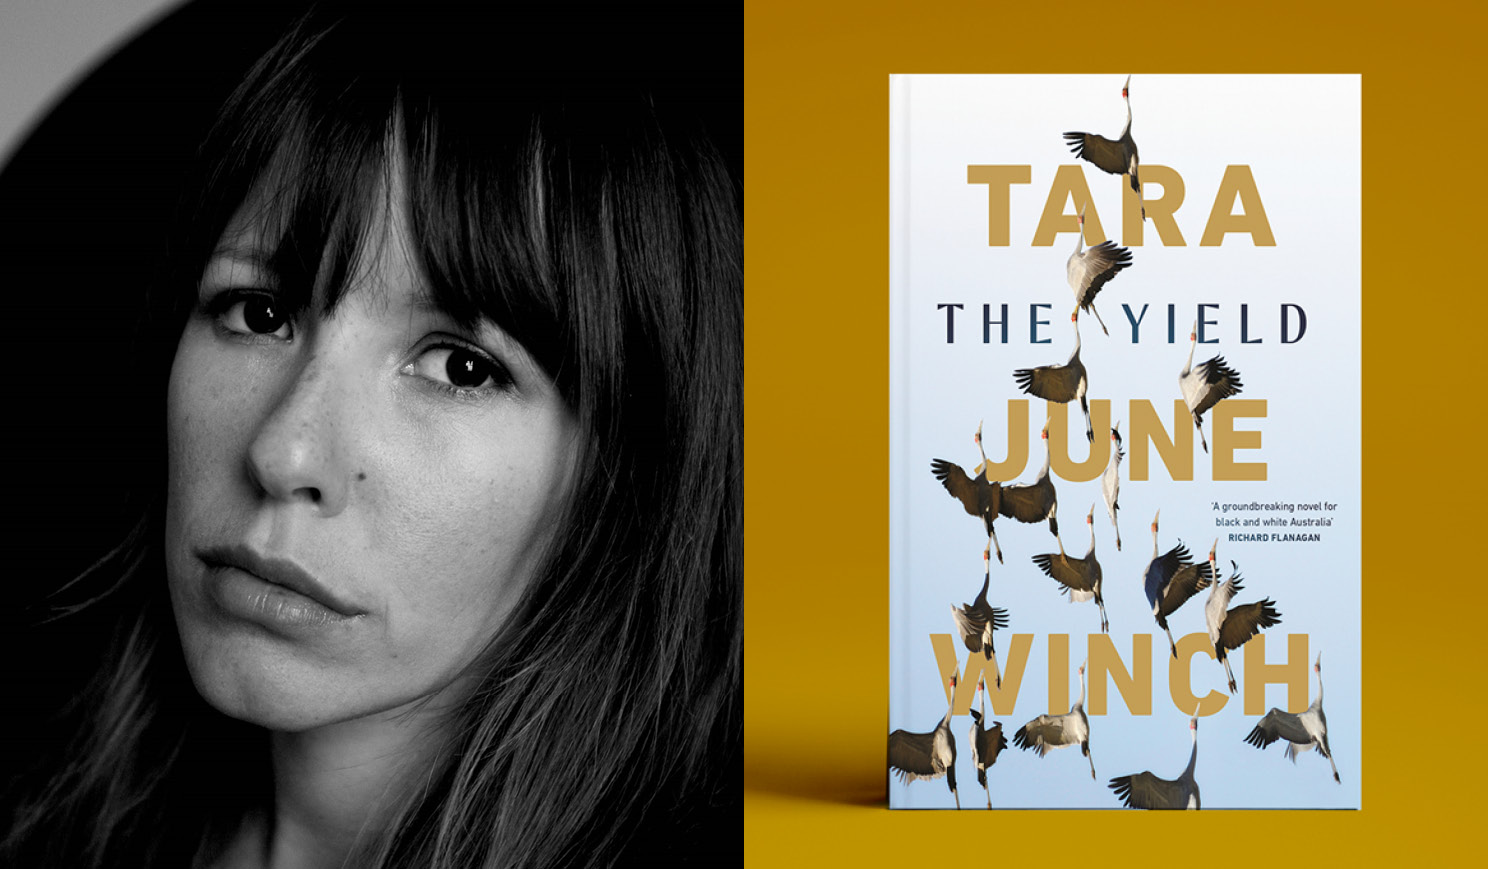 Tara June Winch with the cover of her book The Yield